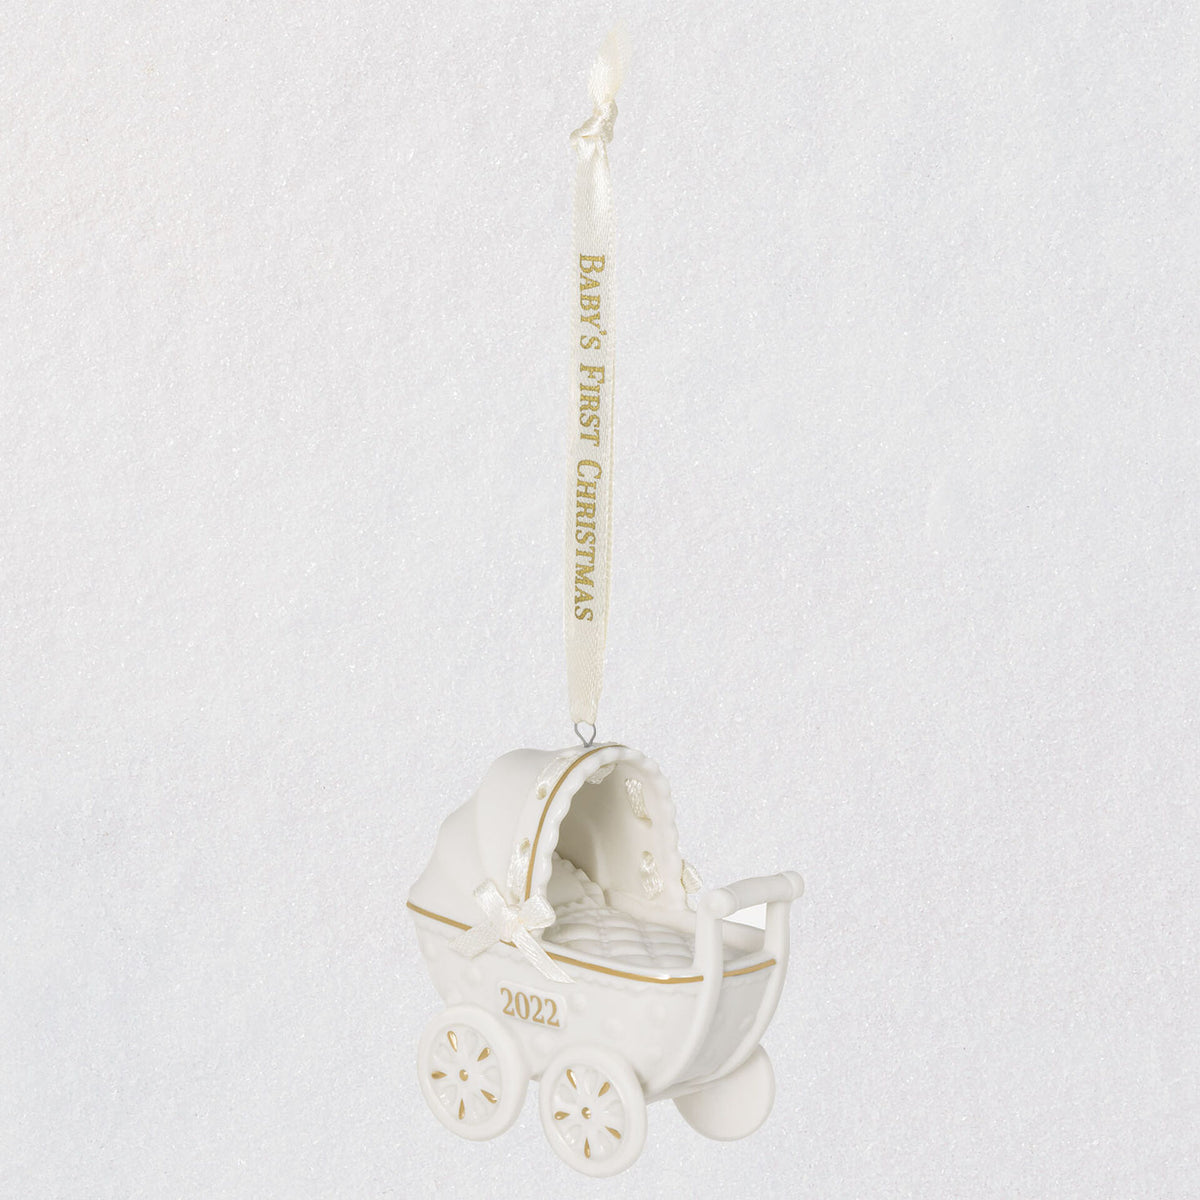 band Donder Verbaasd Dated 2022 Baby's First Christmas Pram Porcelain Ornament — Trudy's Hallmark